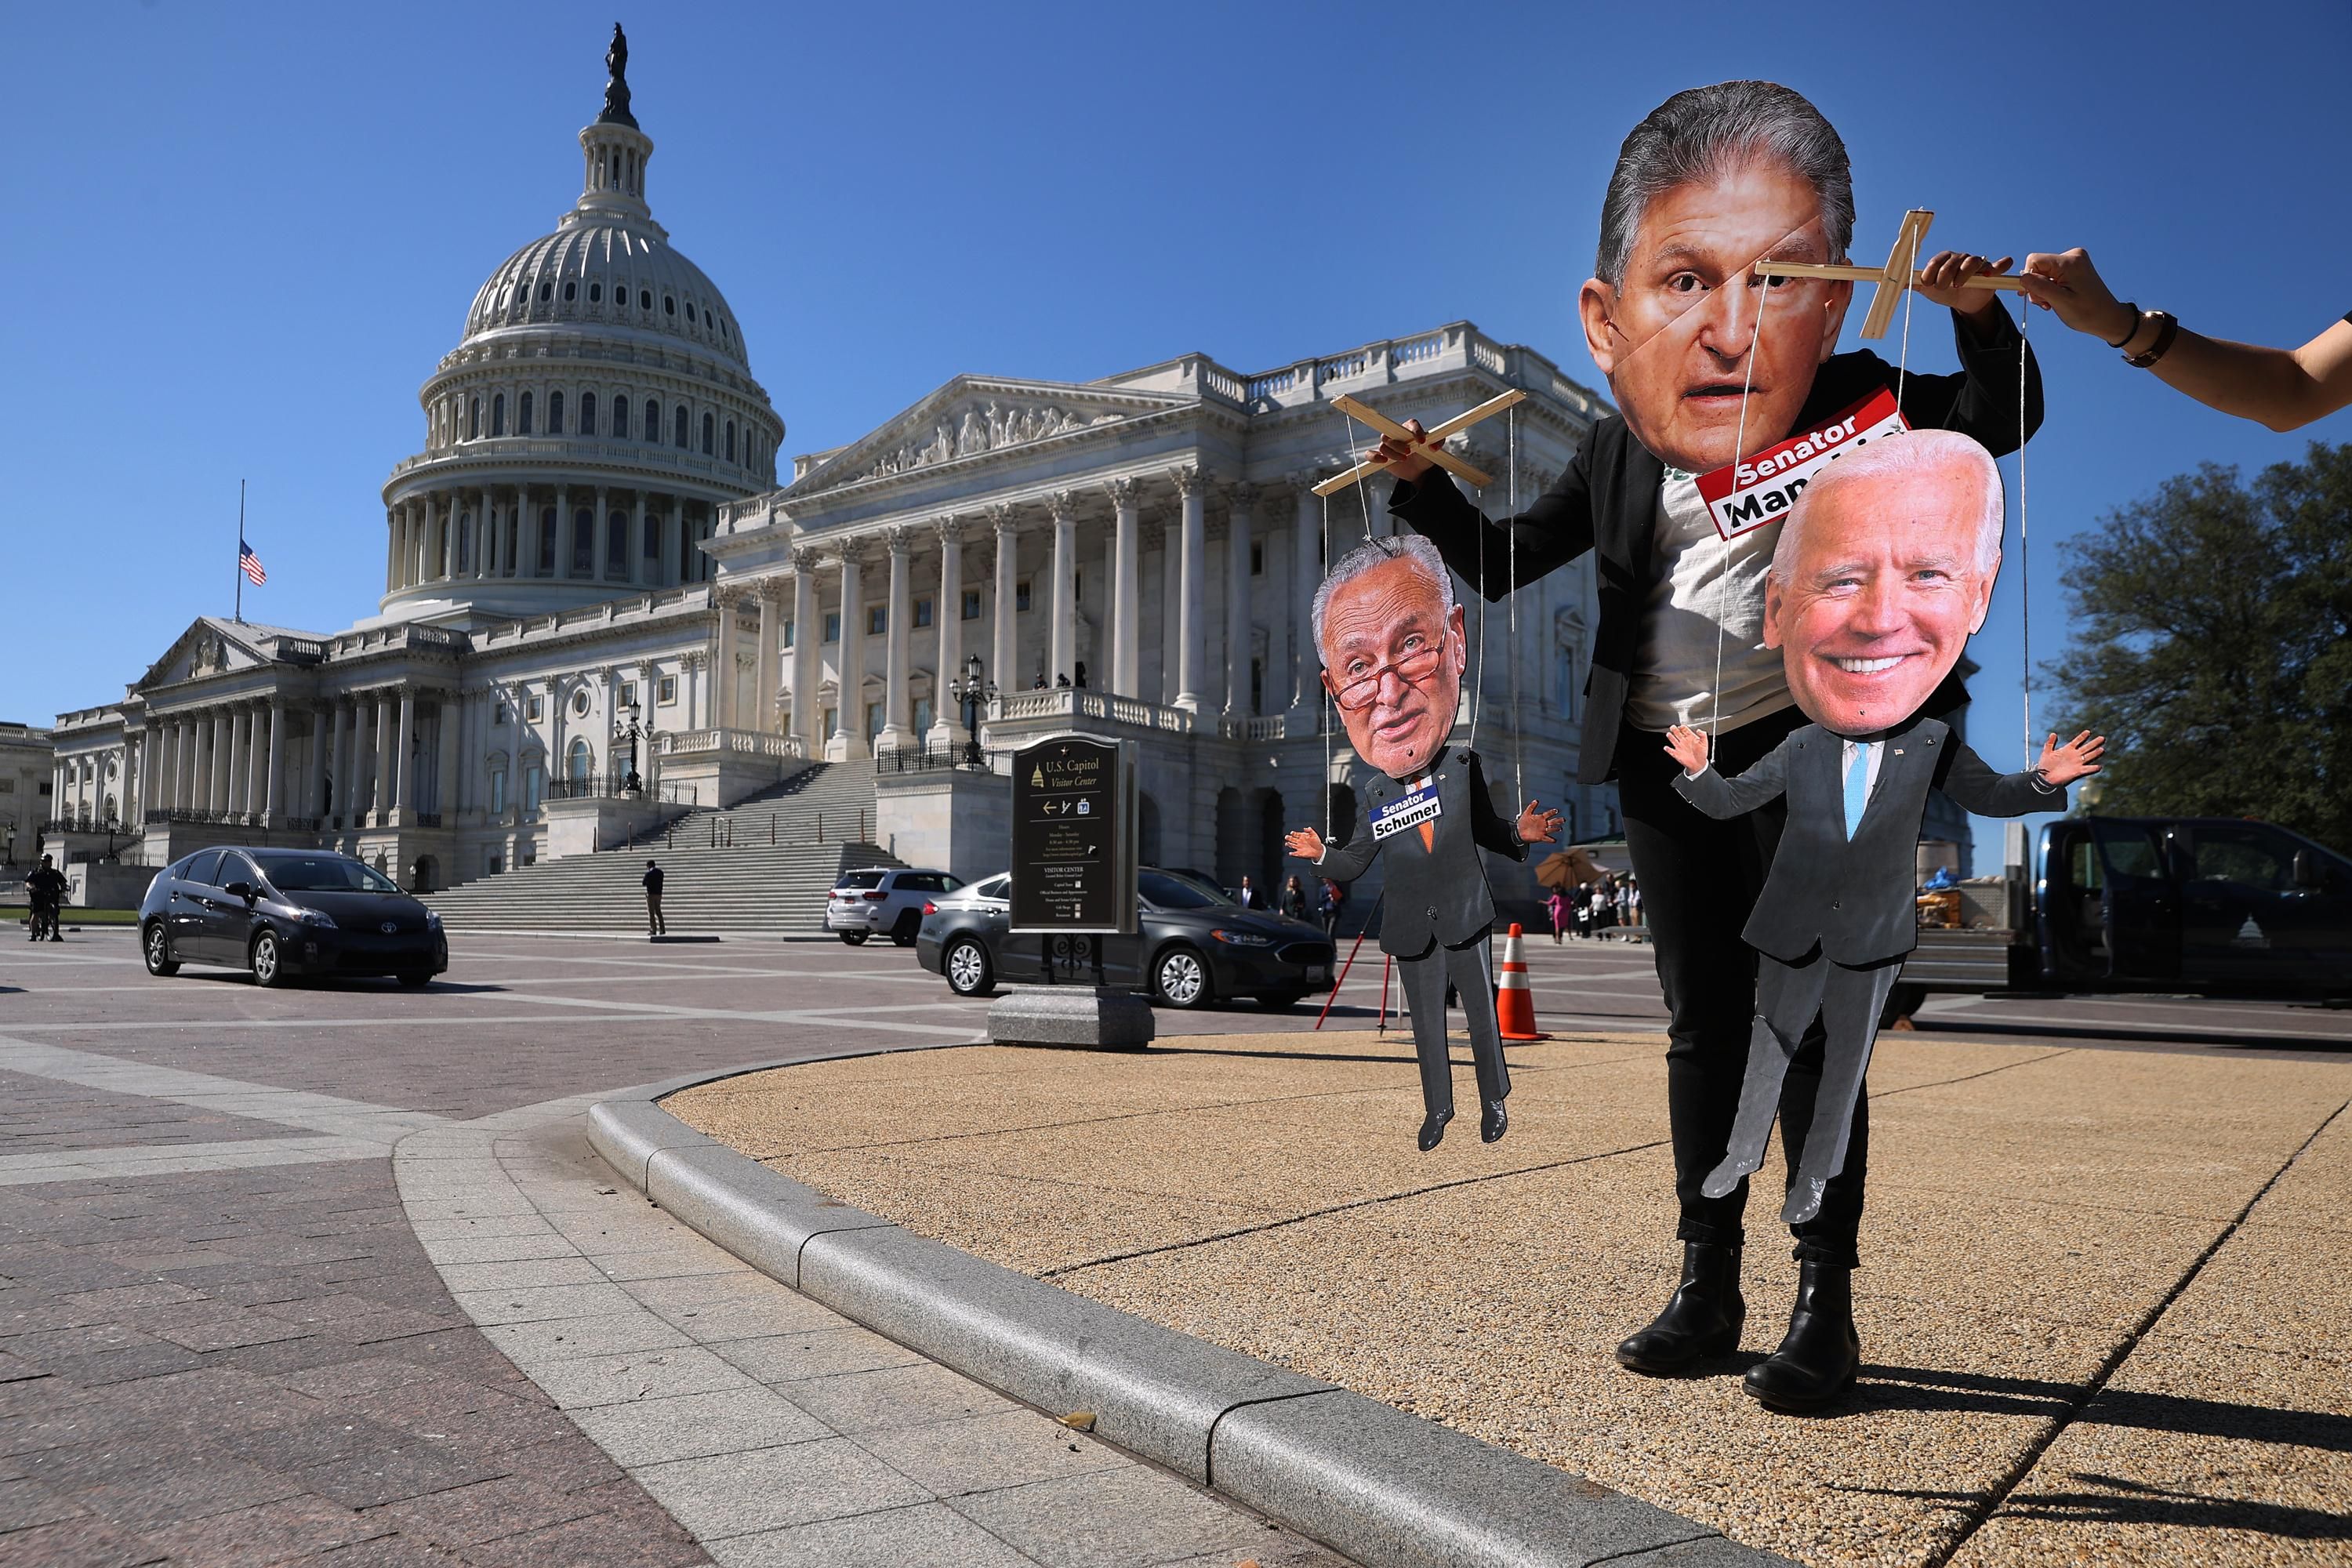 Protester disguised as Joe Manchin